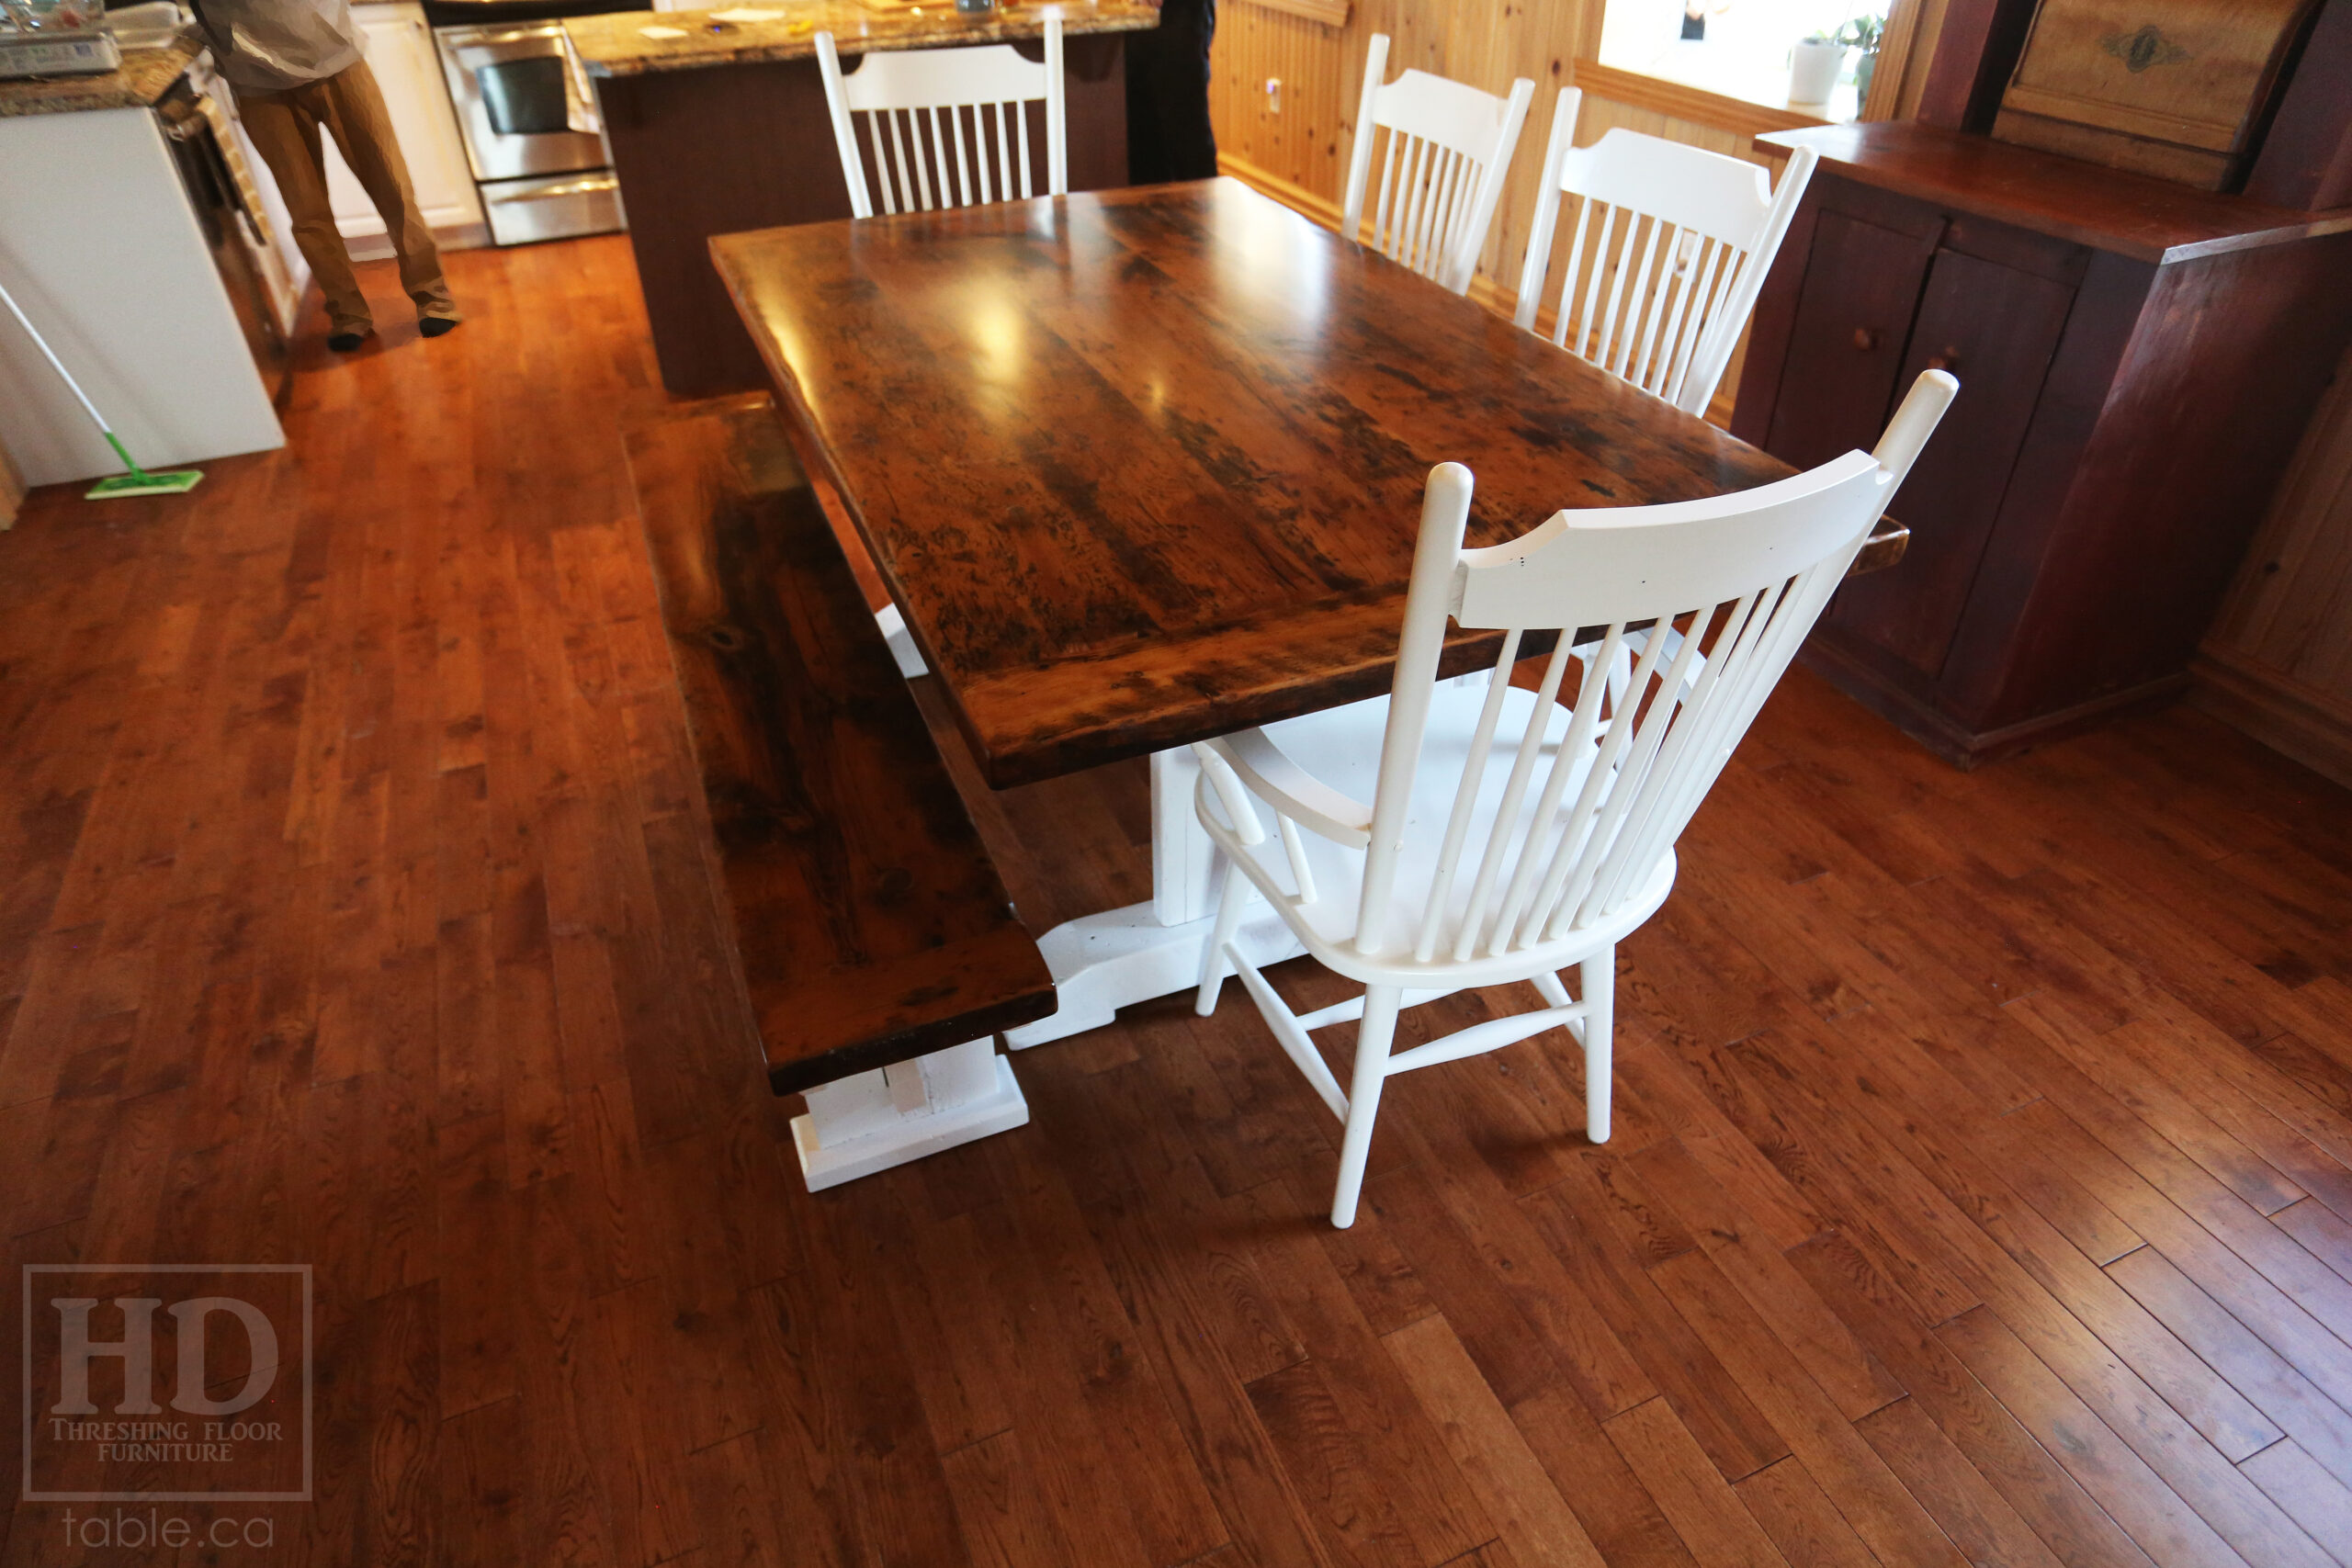 6' Reclaimed Ontario Barnwood Trestle Table we made for a Green Valley, Ontario Home - 42" deep - Trestle Base - Old Growth Hemlock Threshing Floor Construction - Original edges & distressing maintained - White painted base option - Premium epoxy + matte polyurethane finish - [Matching] 6' Bench - [4] Buckhorn Chairs - www.table.ca